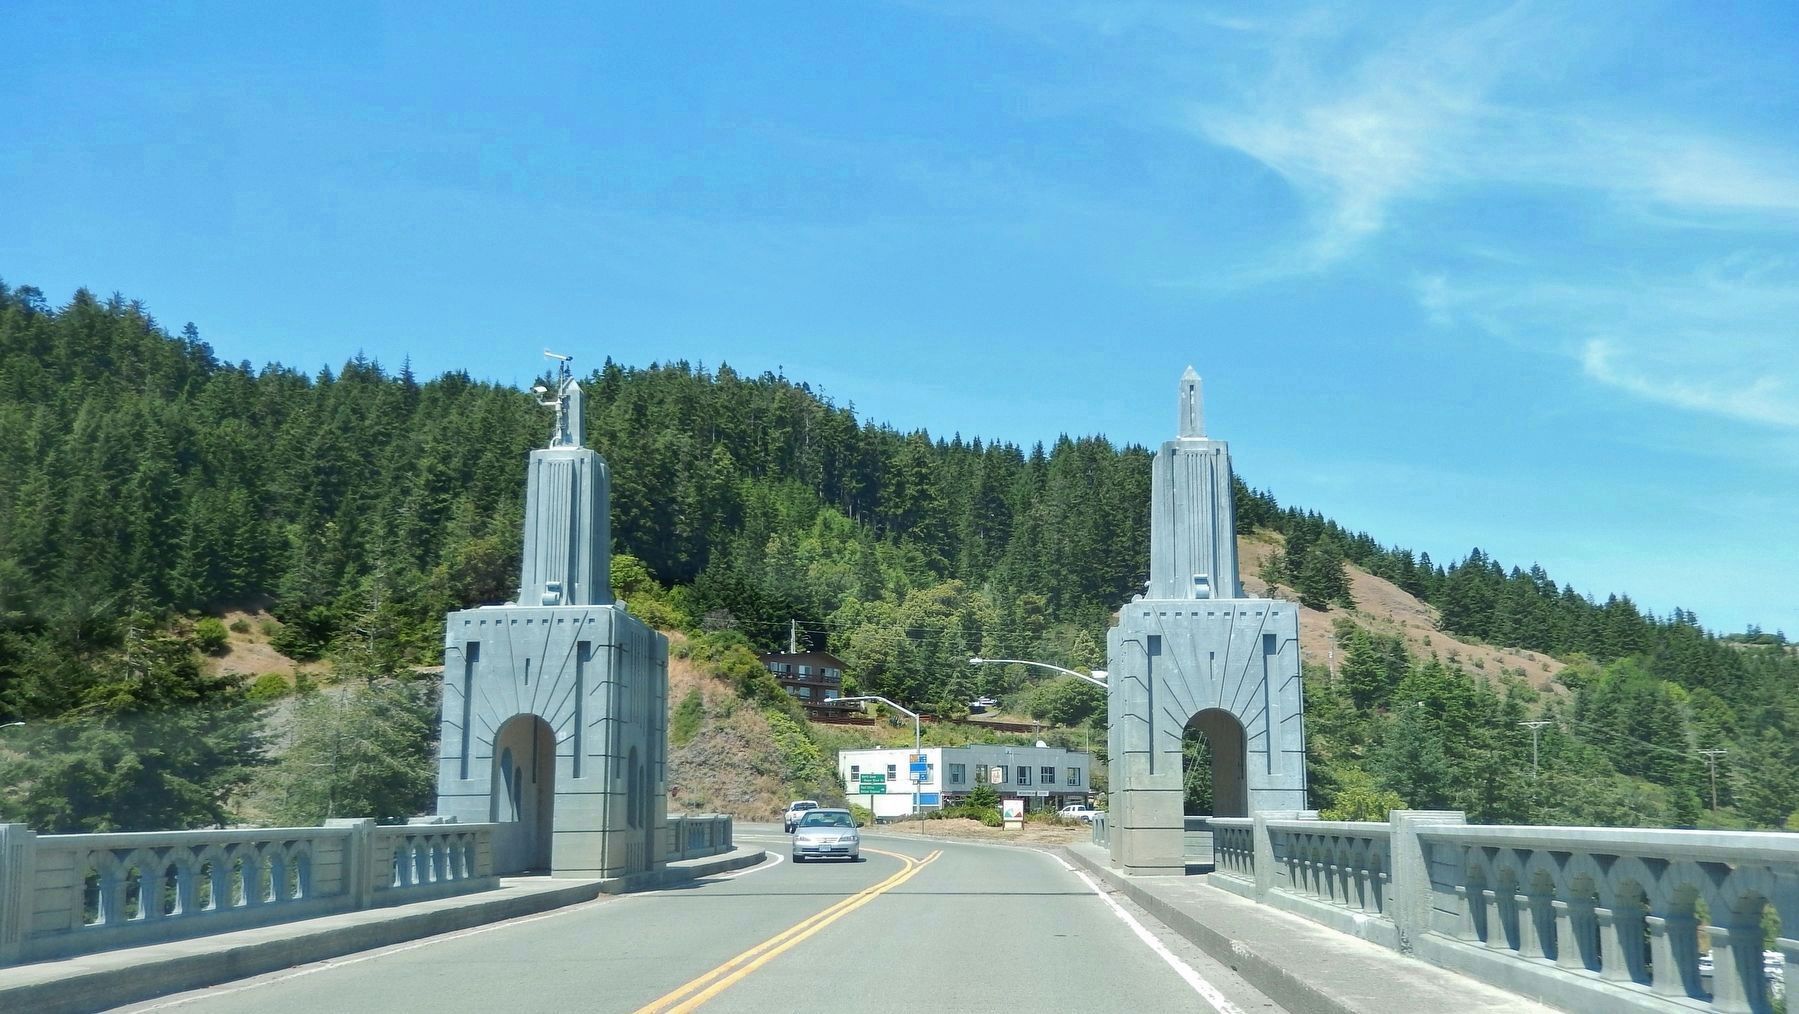 Patterson Bridge (<i>north Art Deco bridge piers and railings as seen from highway</i>) image. Click for full size.